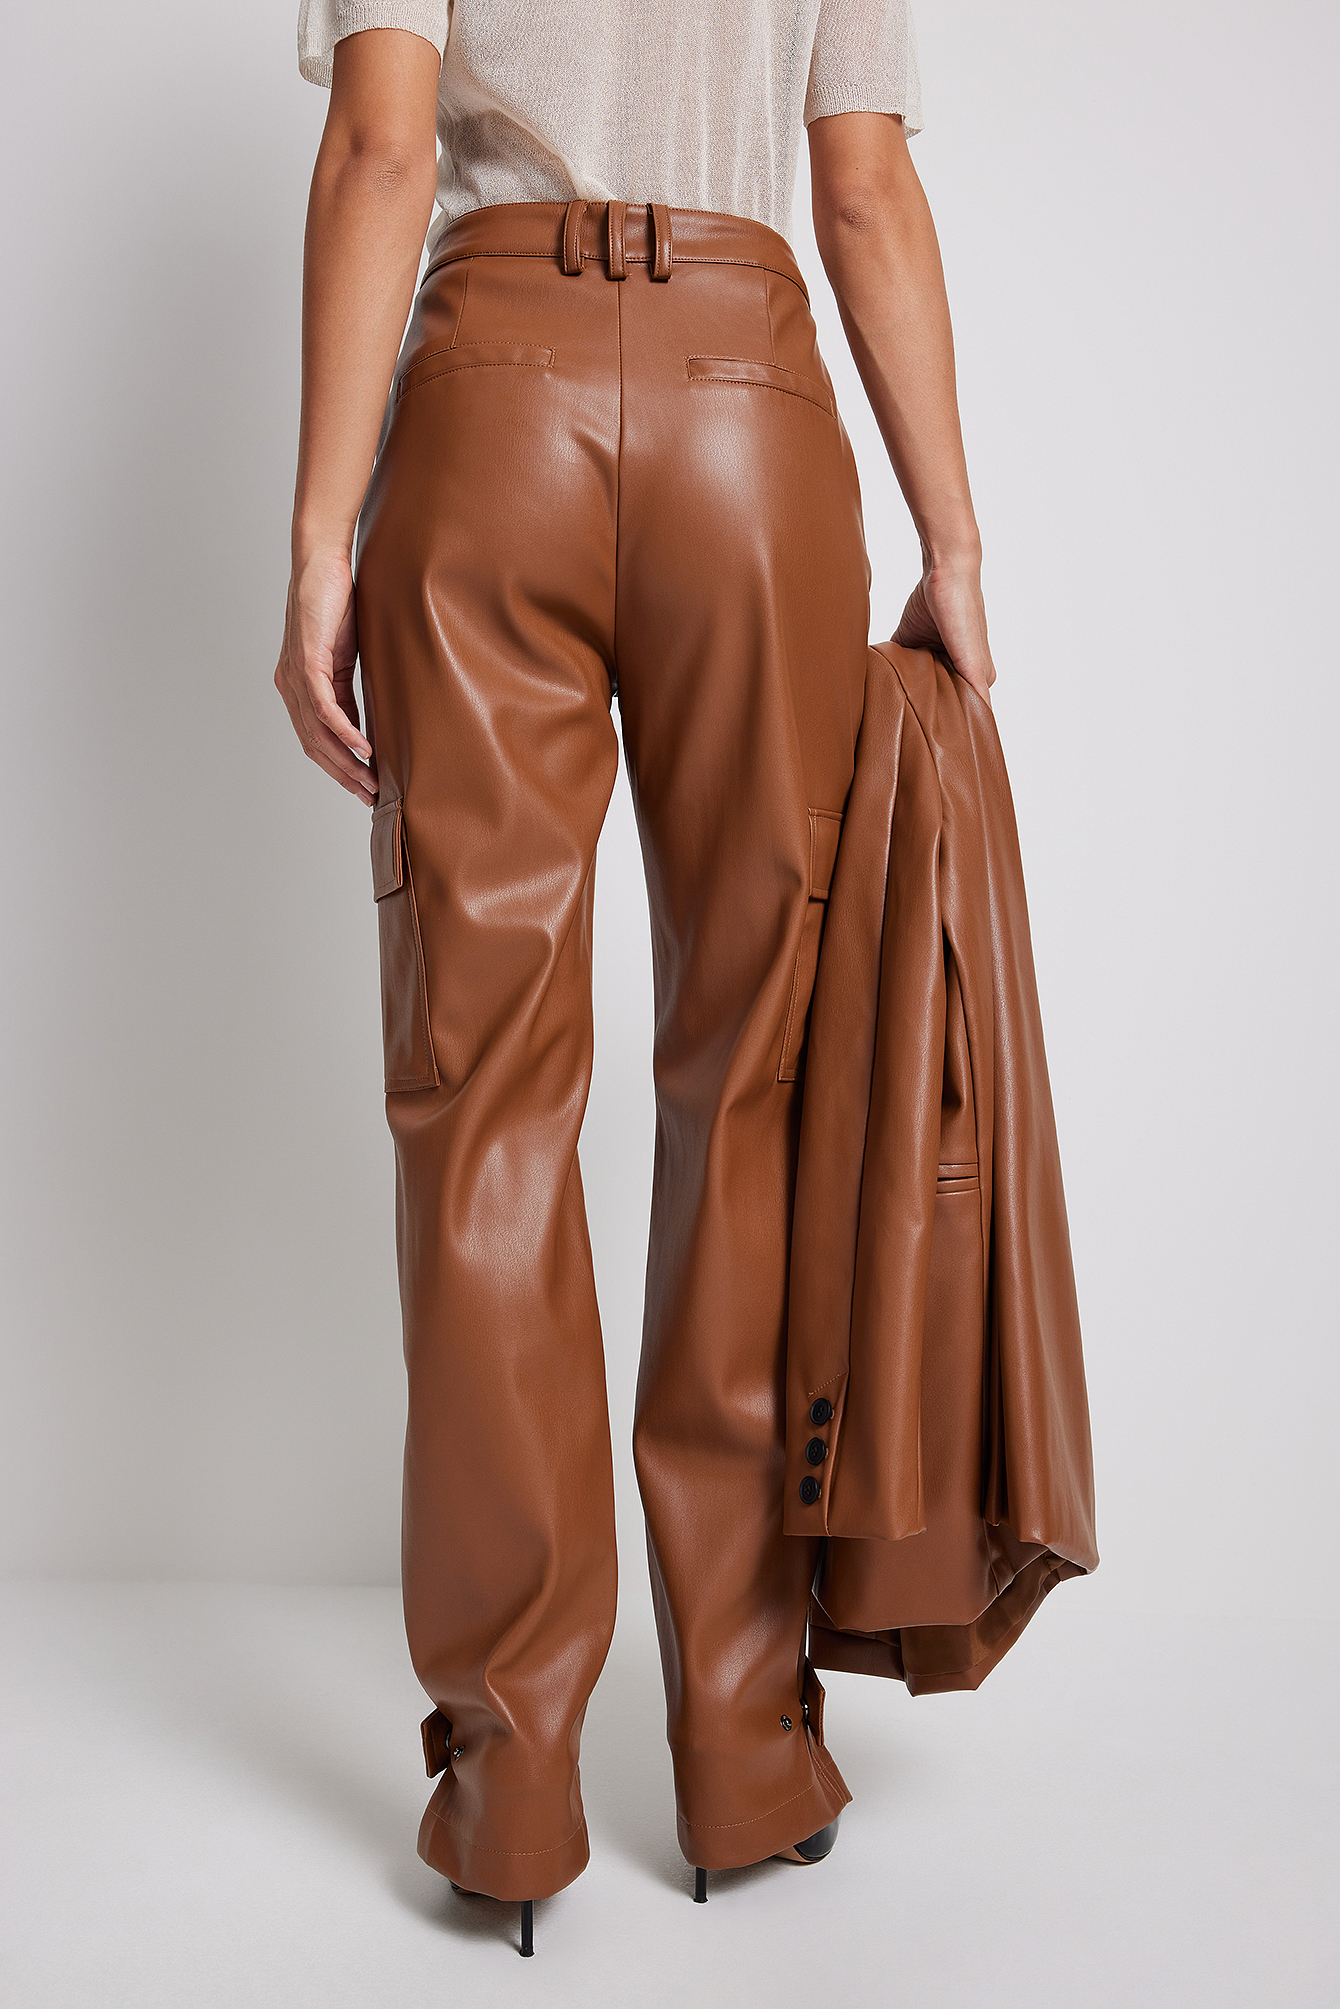 Image of: Brown faux leather pants